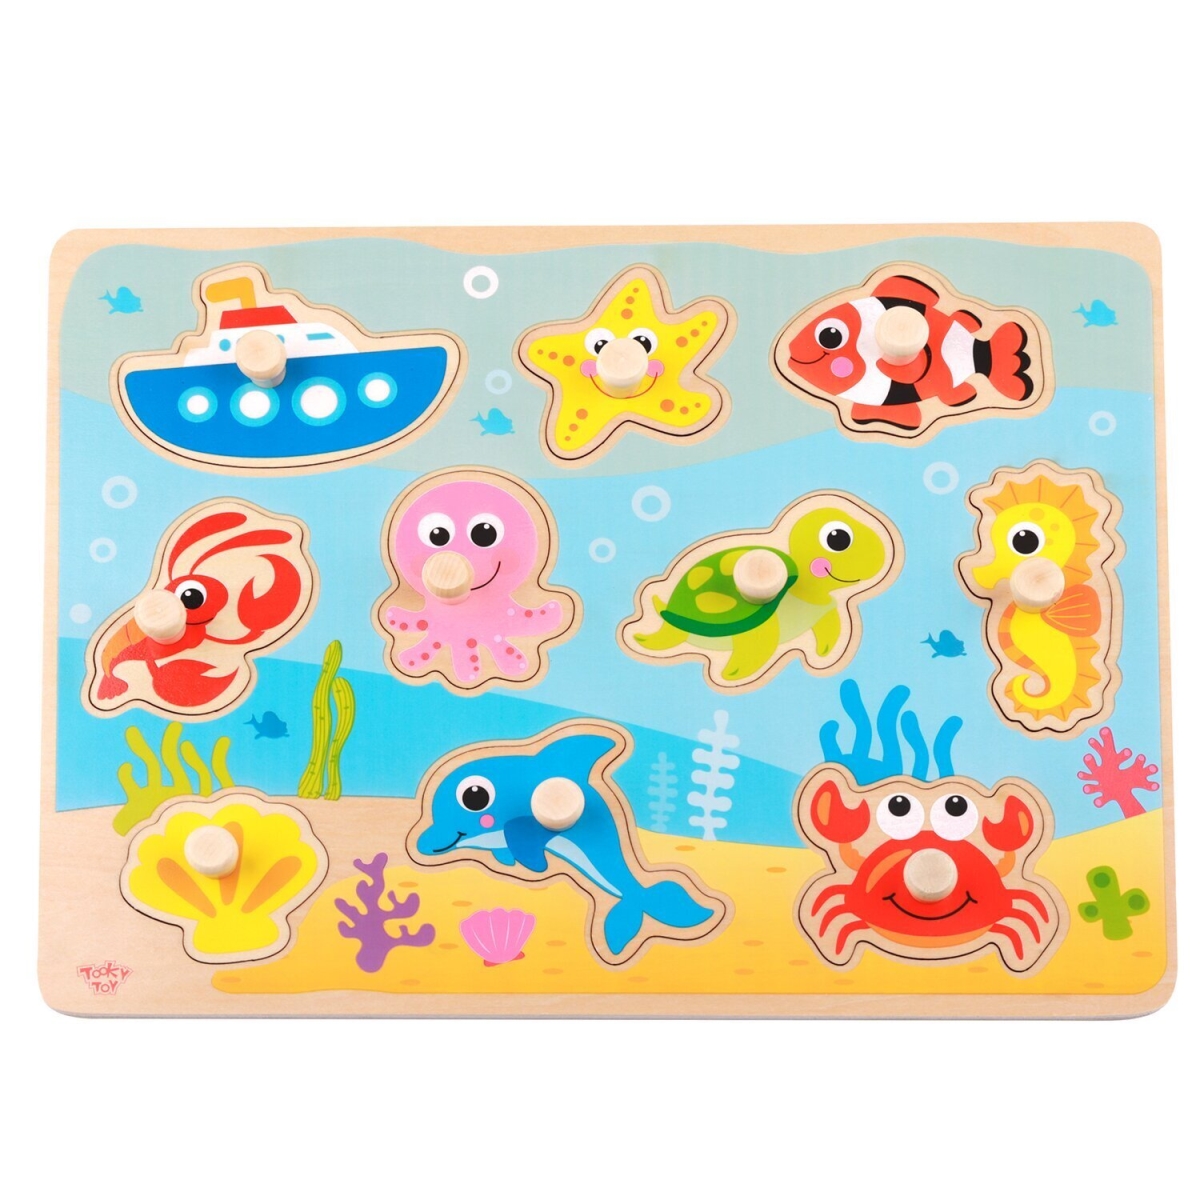 Picture of Tooky Toy 300381 30 x 23 x 2 cm Marine Puzzle